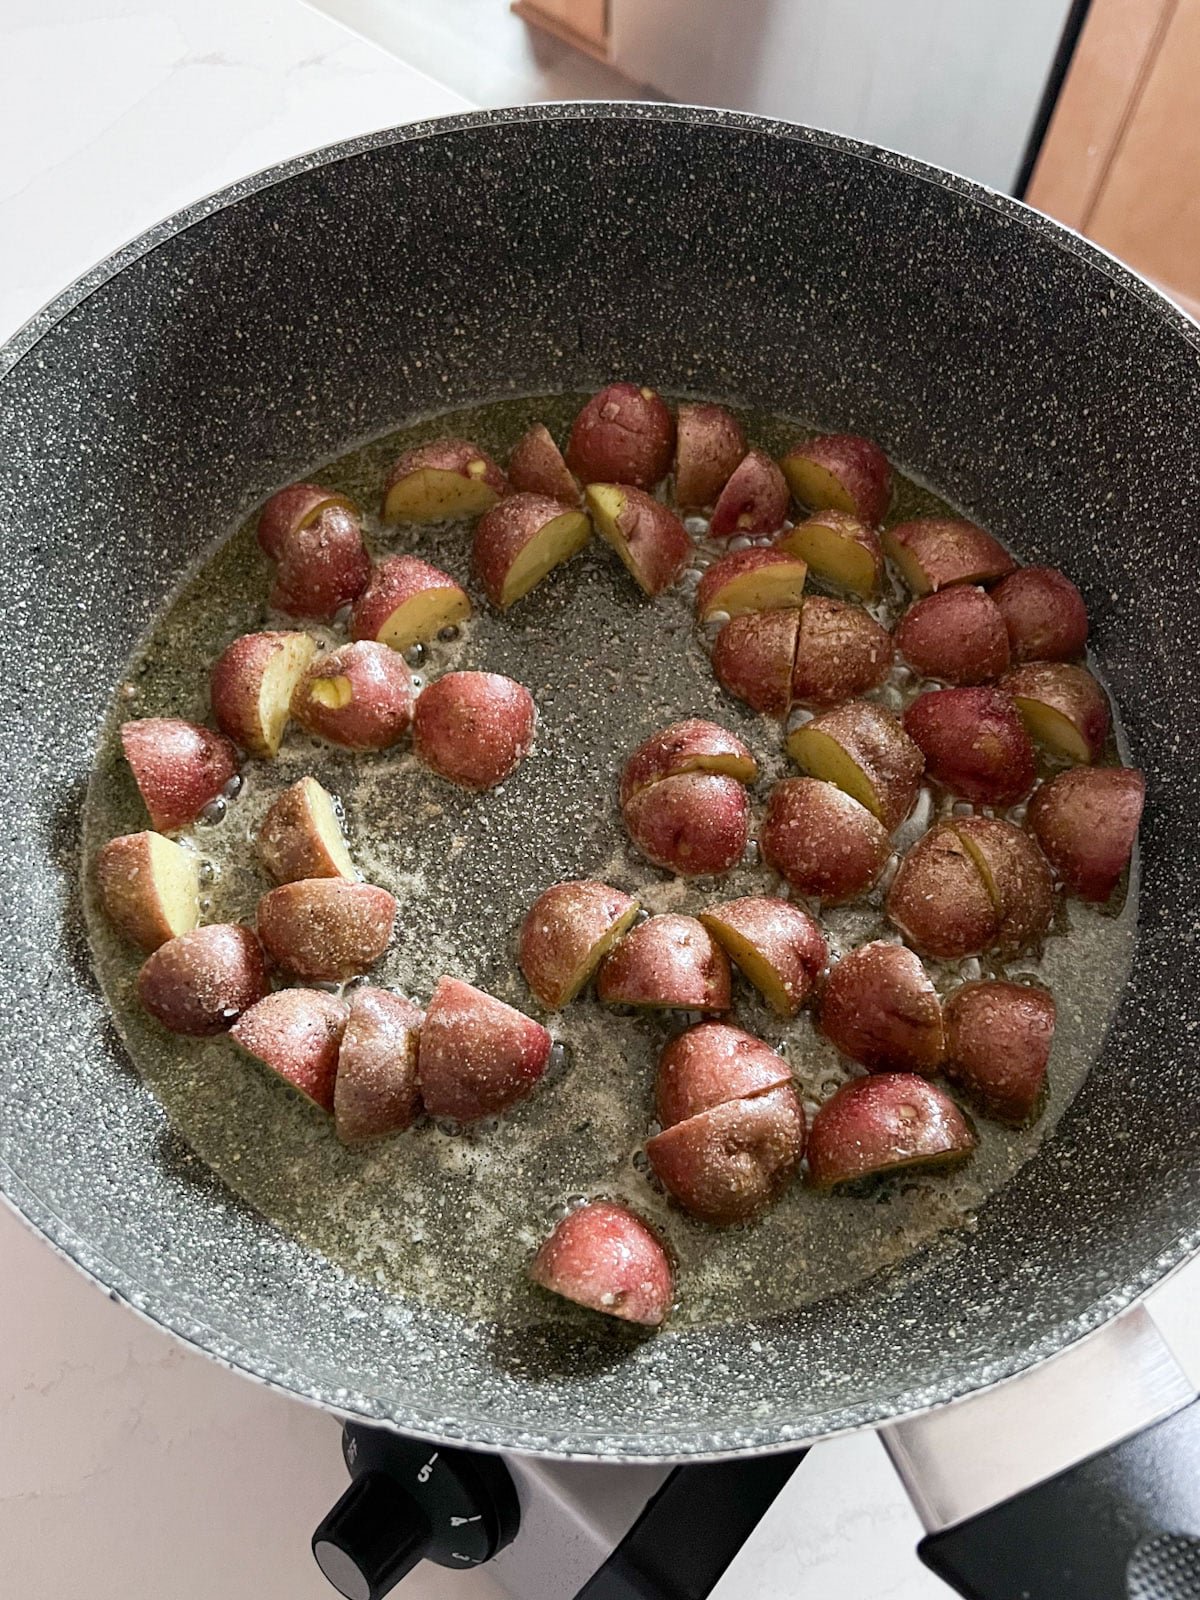 Partially cooked potatoes in a greased skillet cooking.